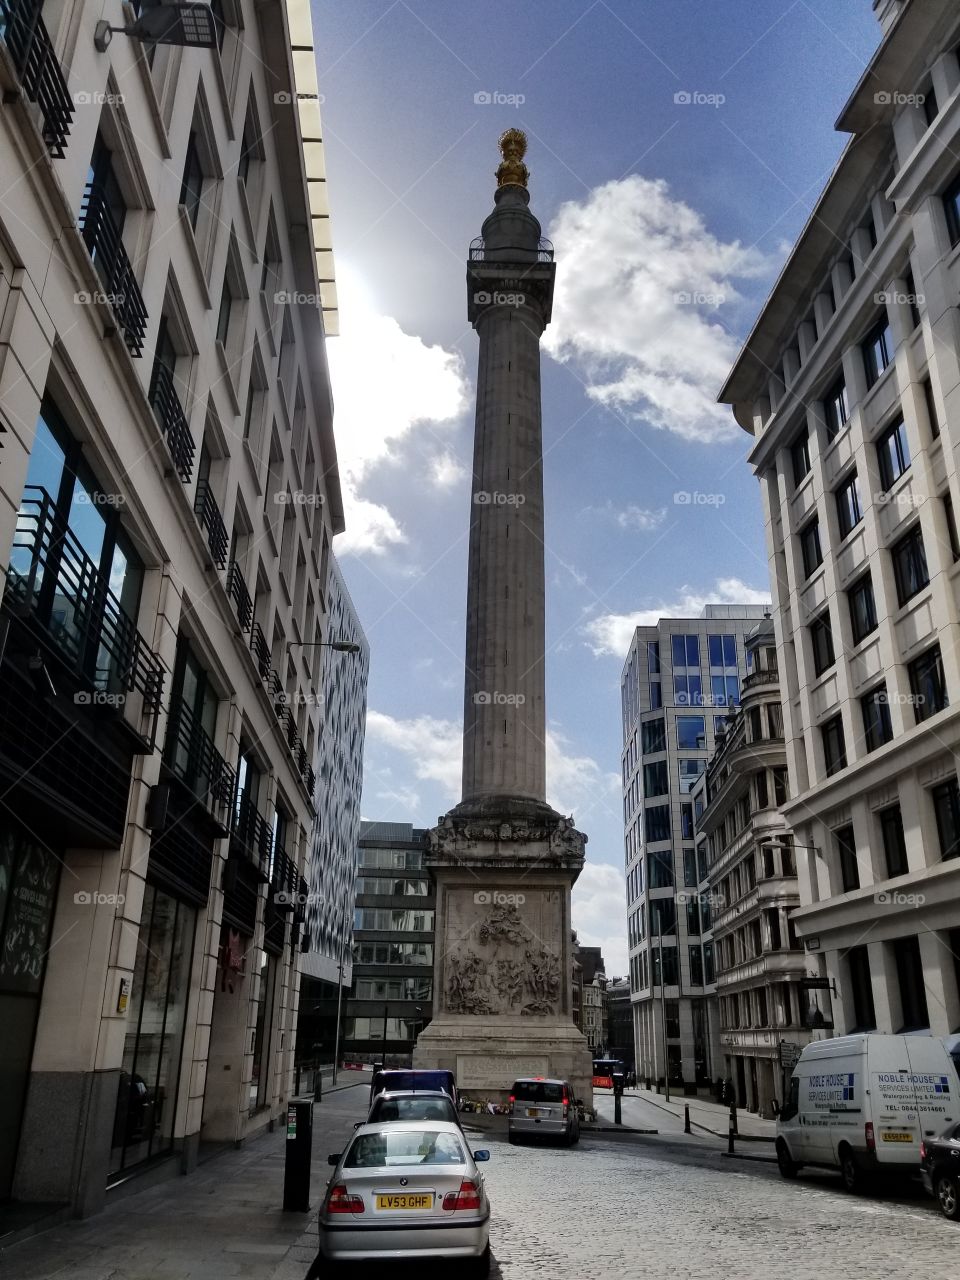 memorial pillar in London with golden crowning